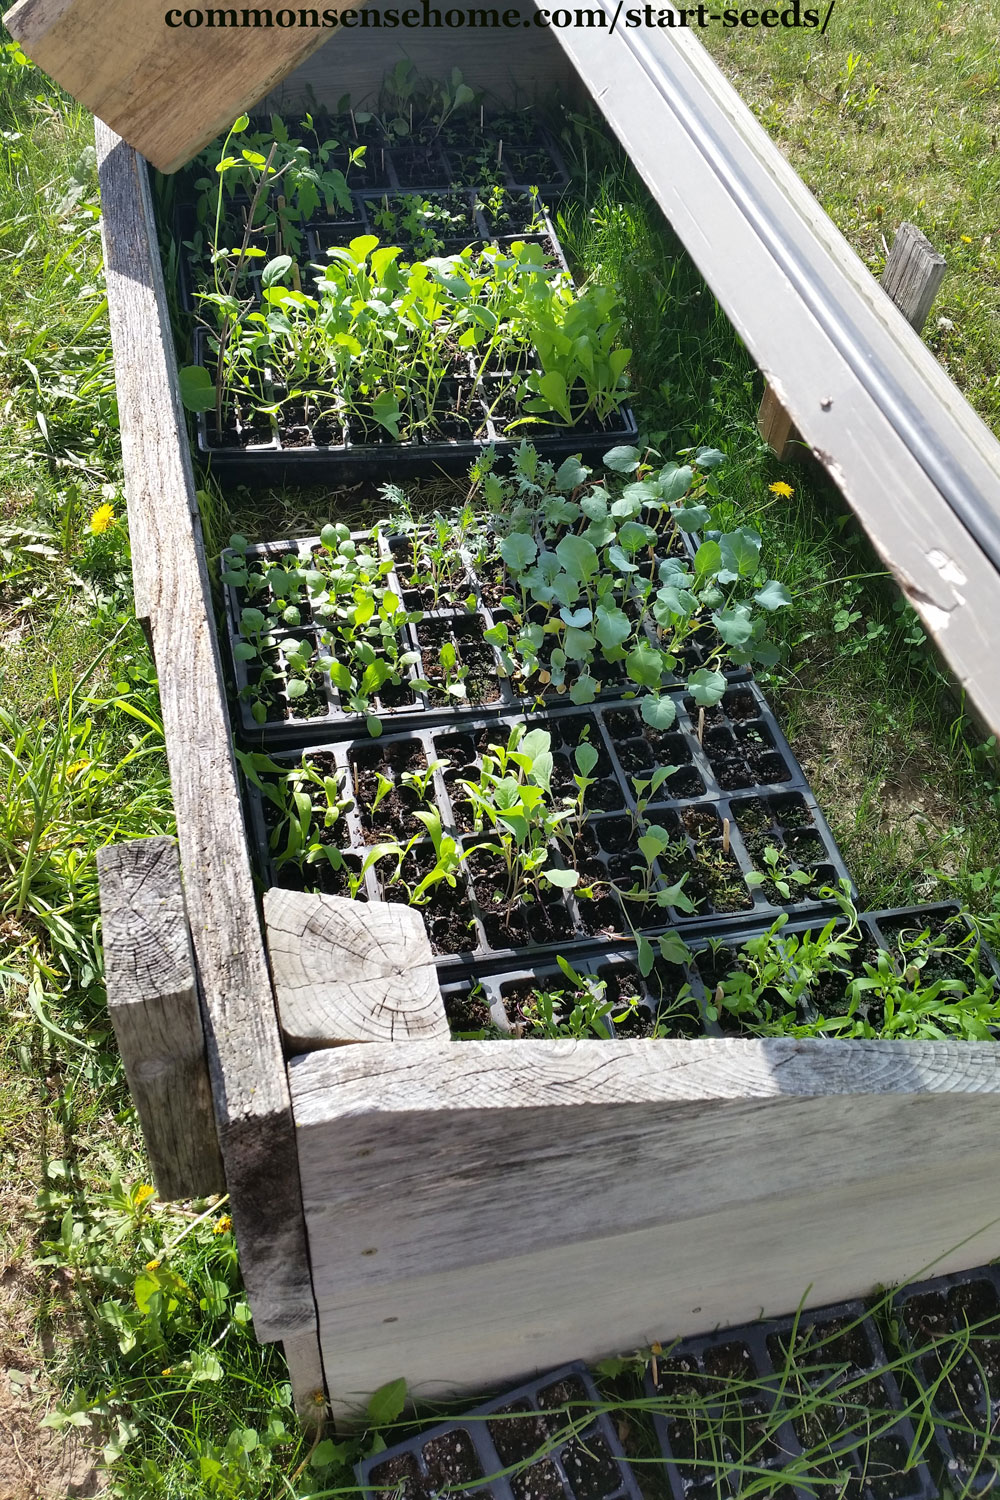 hardening off seedlings in a cold frame